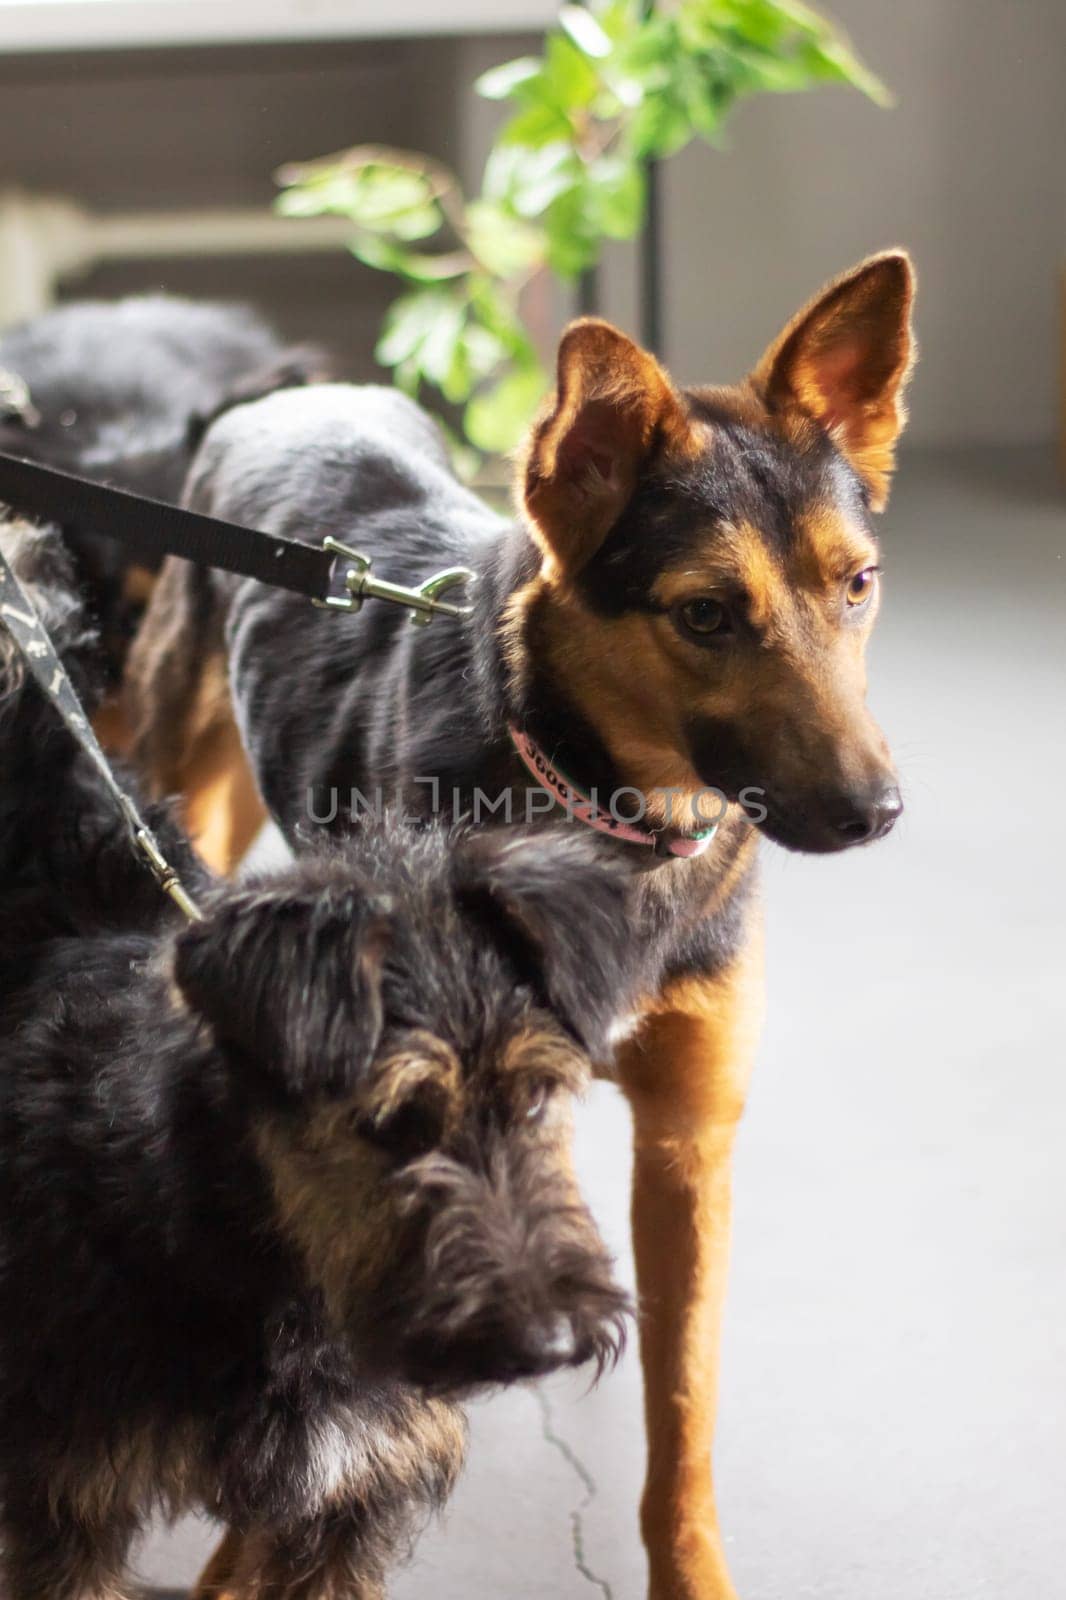 A pack of Canidae, carnivorous terrestrial animals, including various dog breeds from the Sporting Group, stand side by side on a leash, sharing a bond as working dogs with distinctive snouts